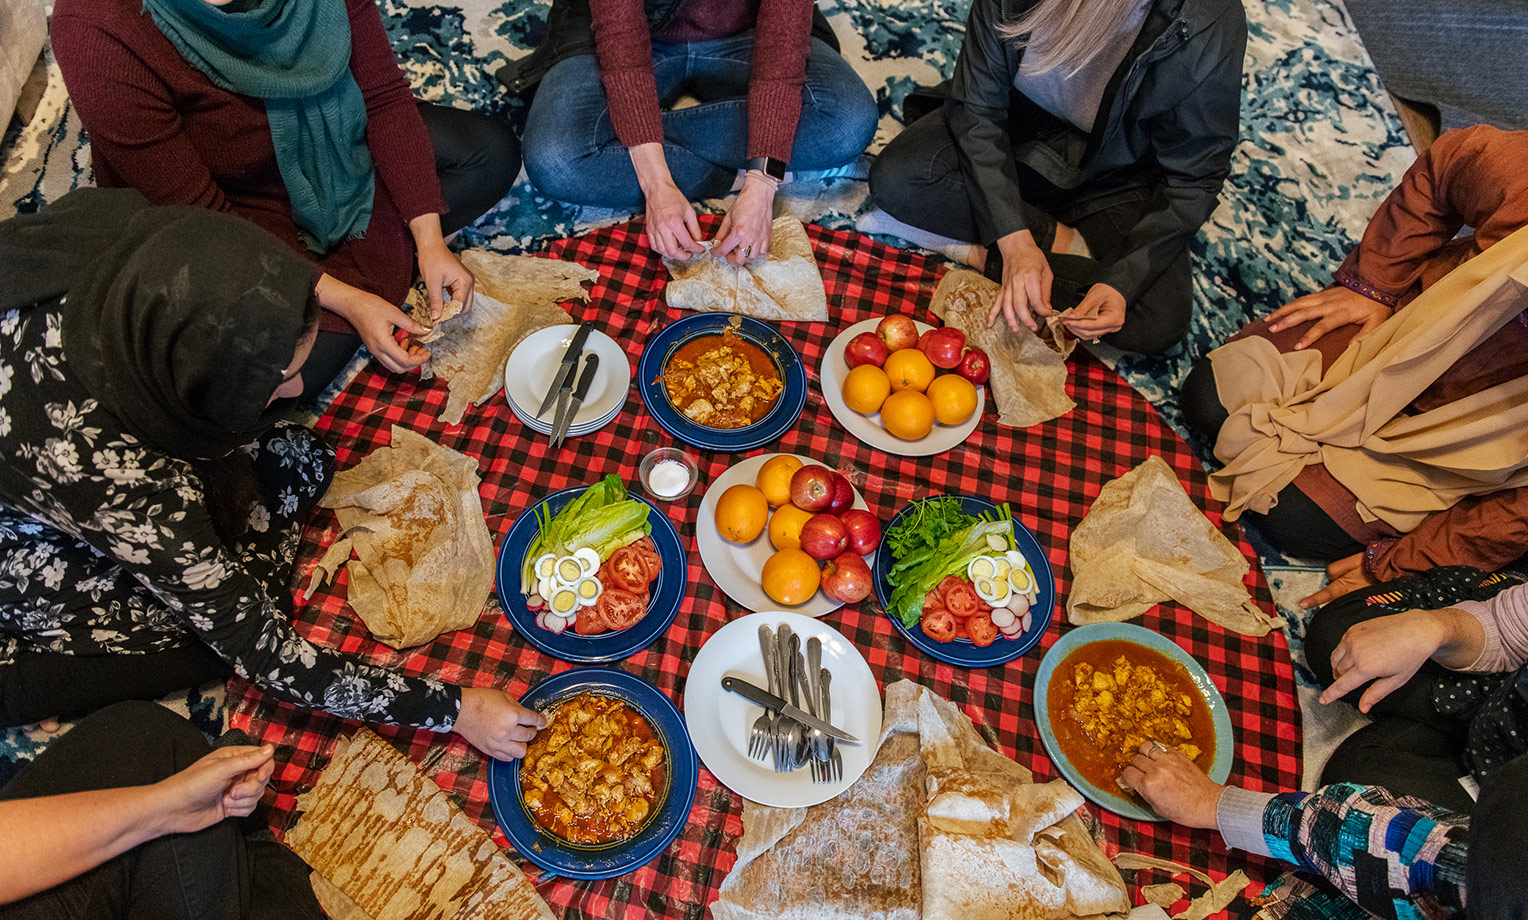 Sharing meals together is a great way for church sponsors and Afghan families to get to know one another and to begin forming friendships.